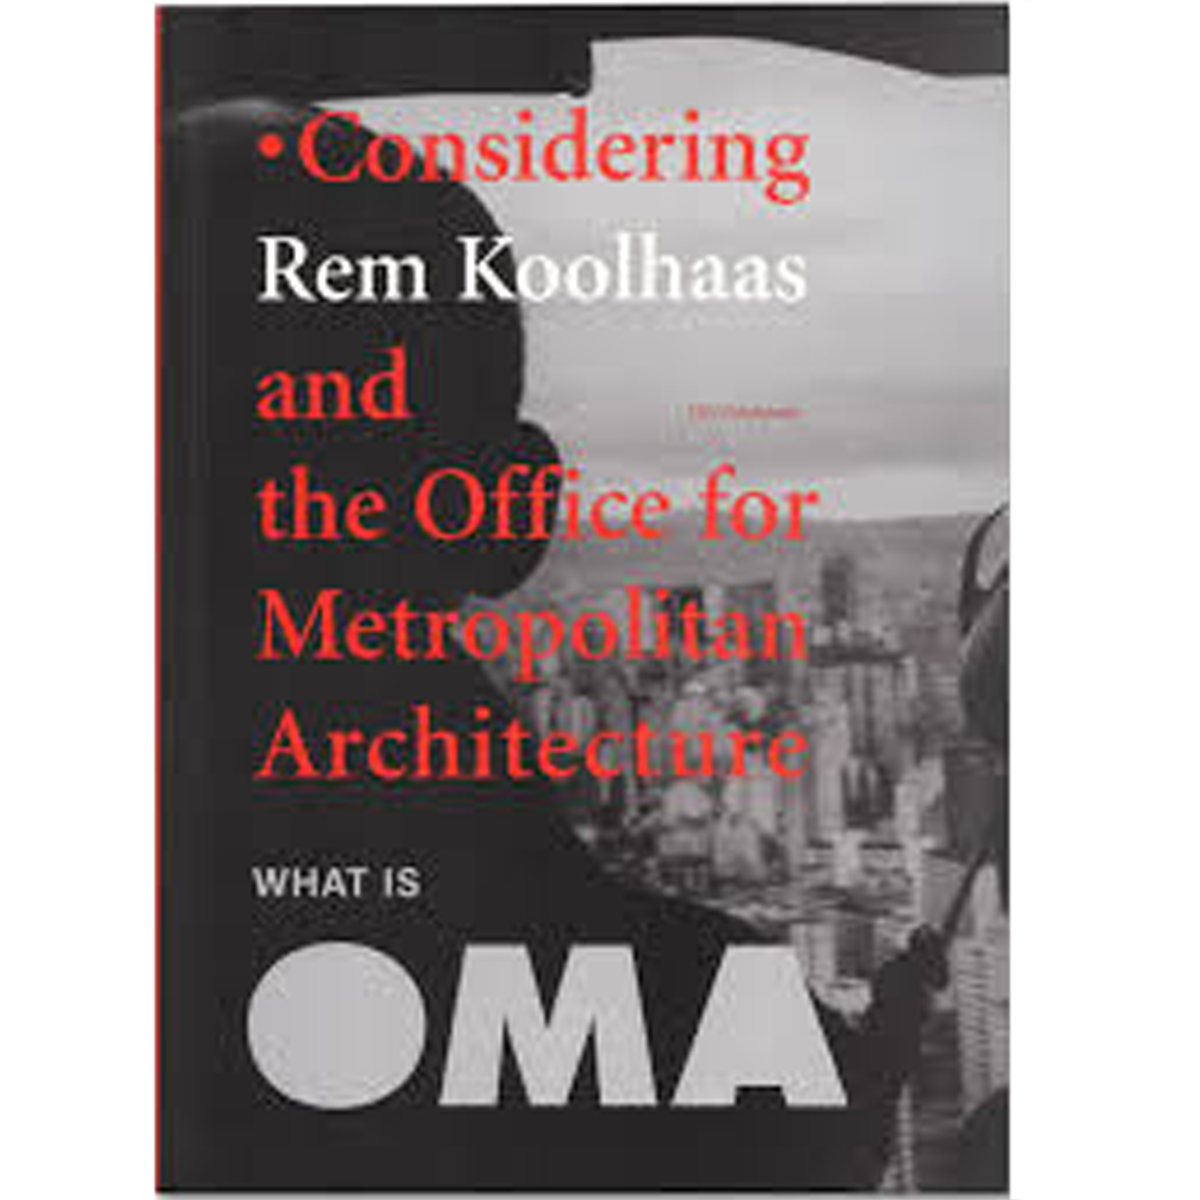 What is OMA? Considering Rem Koolhaas and the OMA